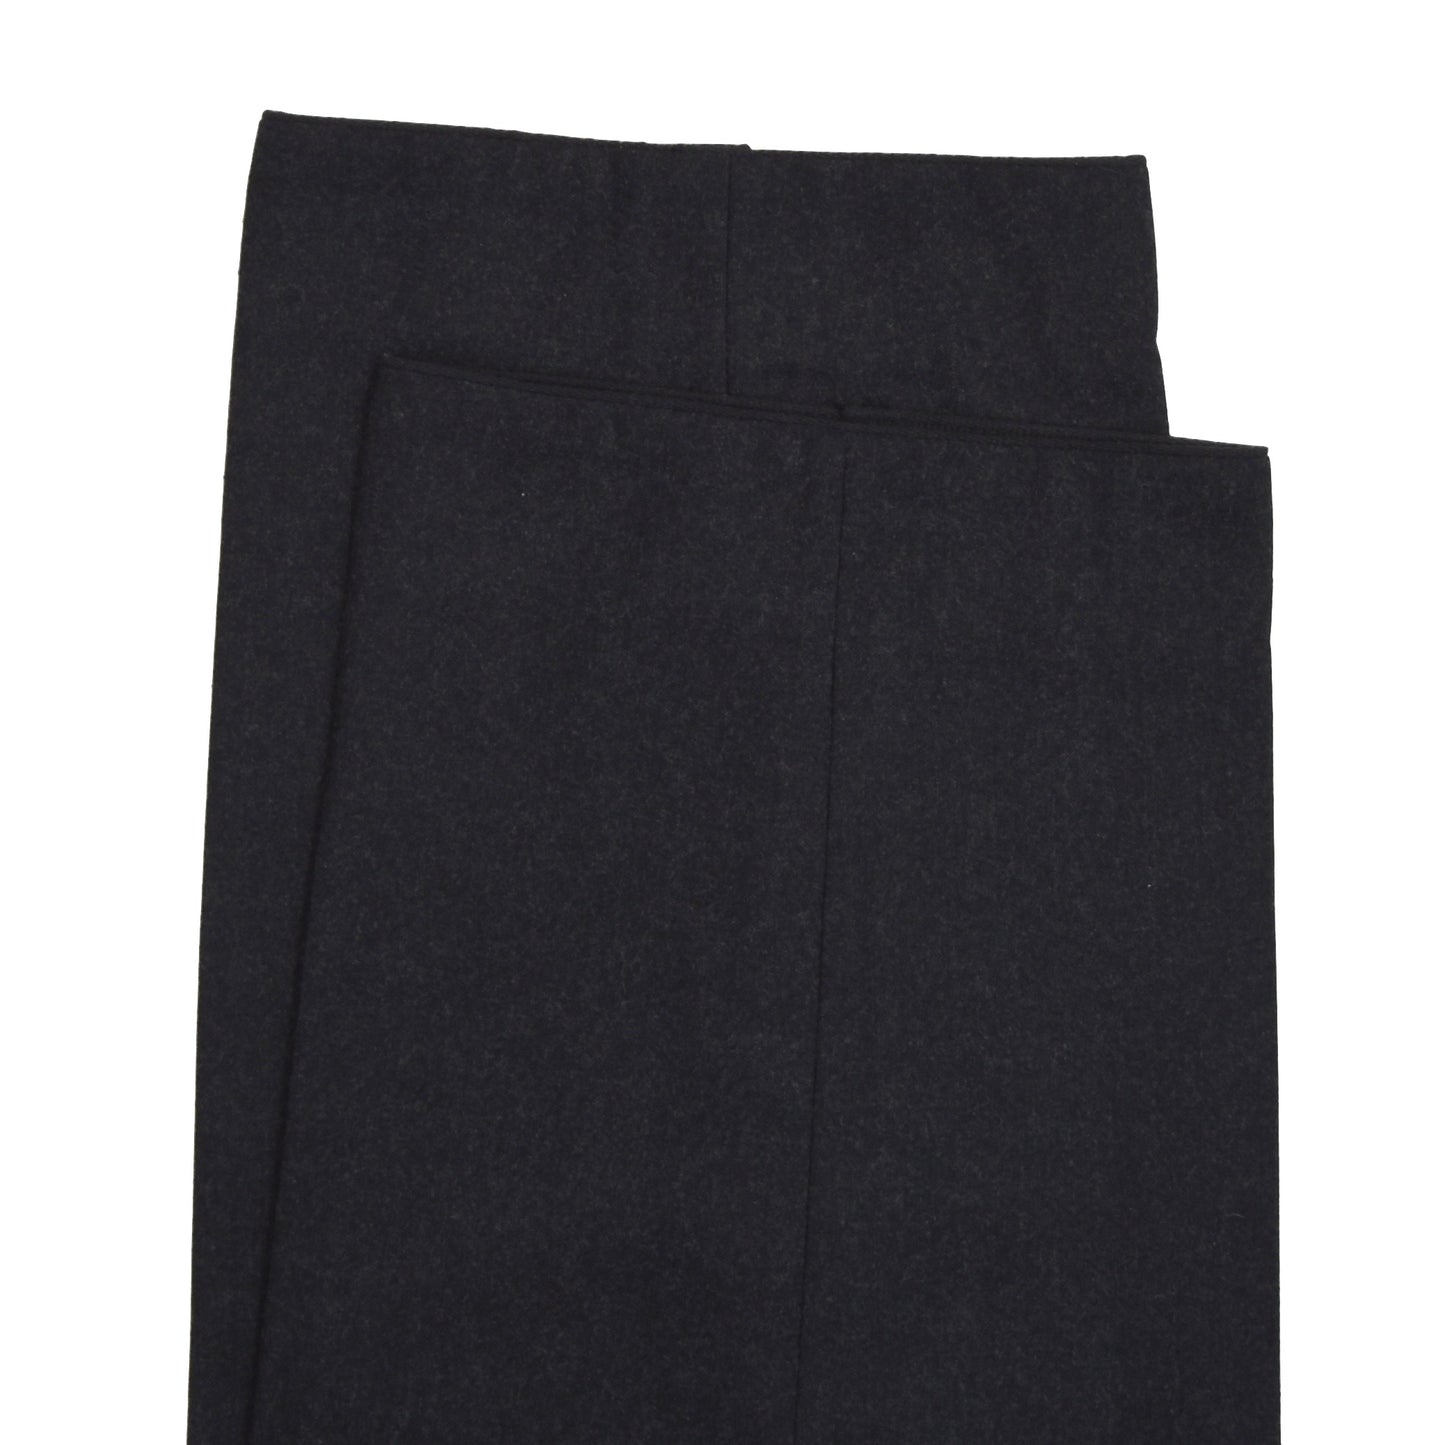 Canali 1934 Wool Flannel Pants - Charcoal